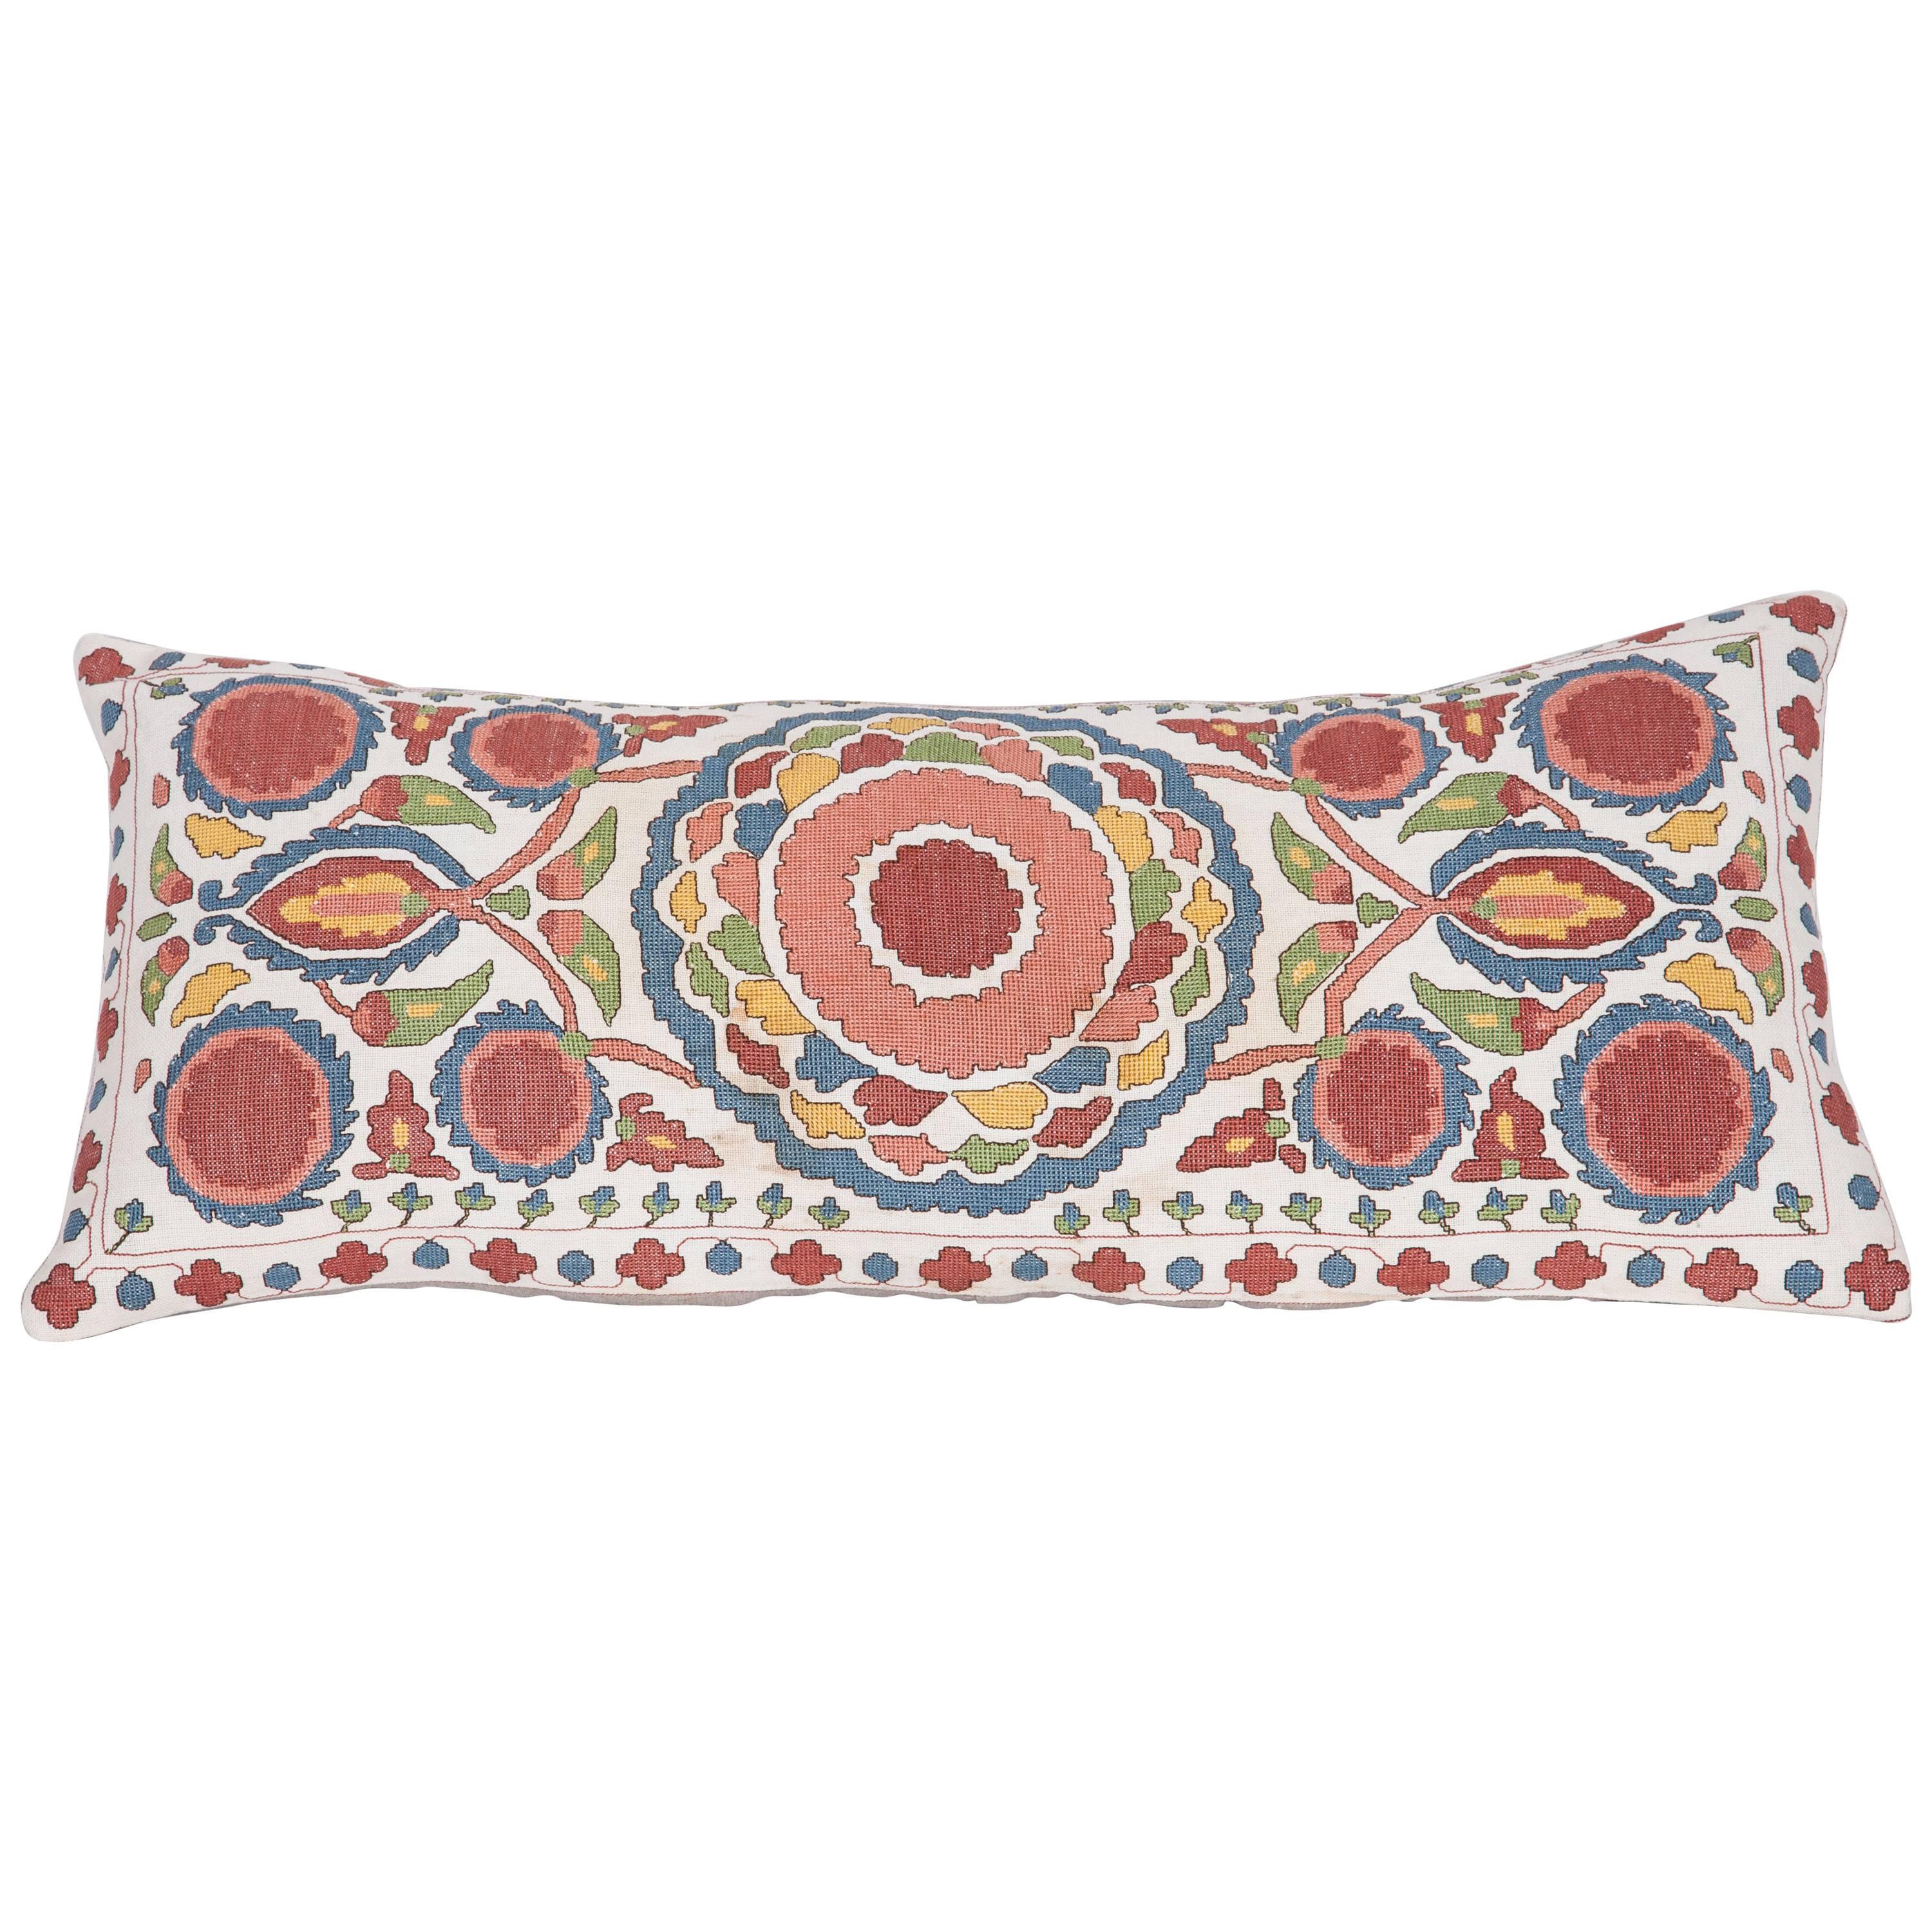 Antique Pillow Made Out of an Early 20th Century Bulgarian Embroidery For Sale